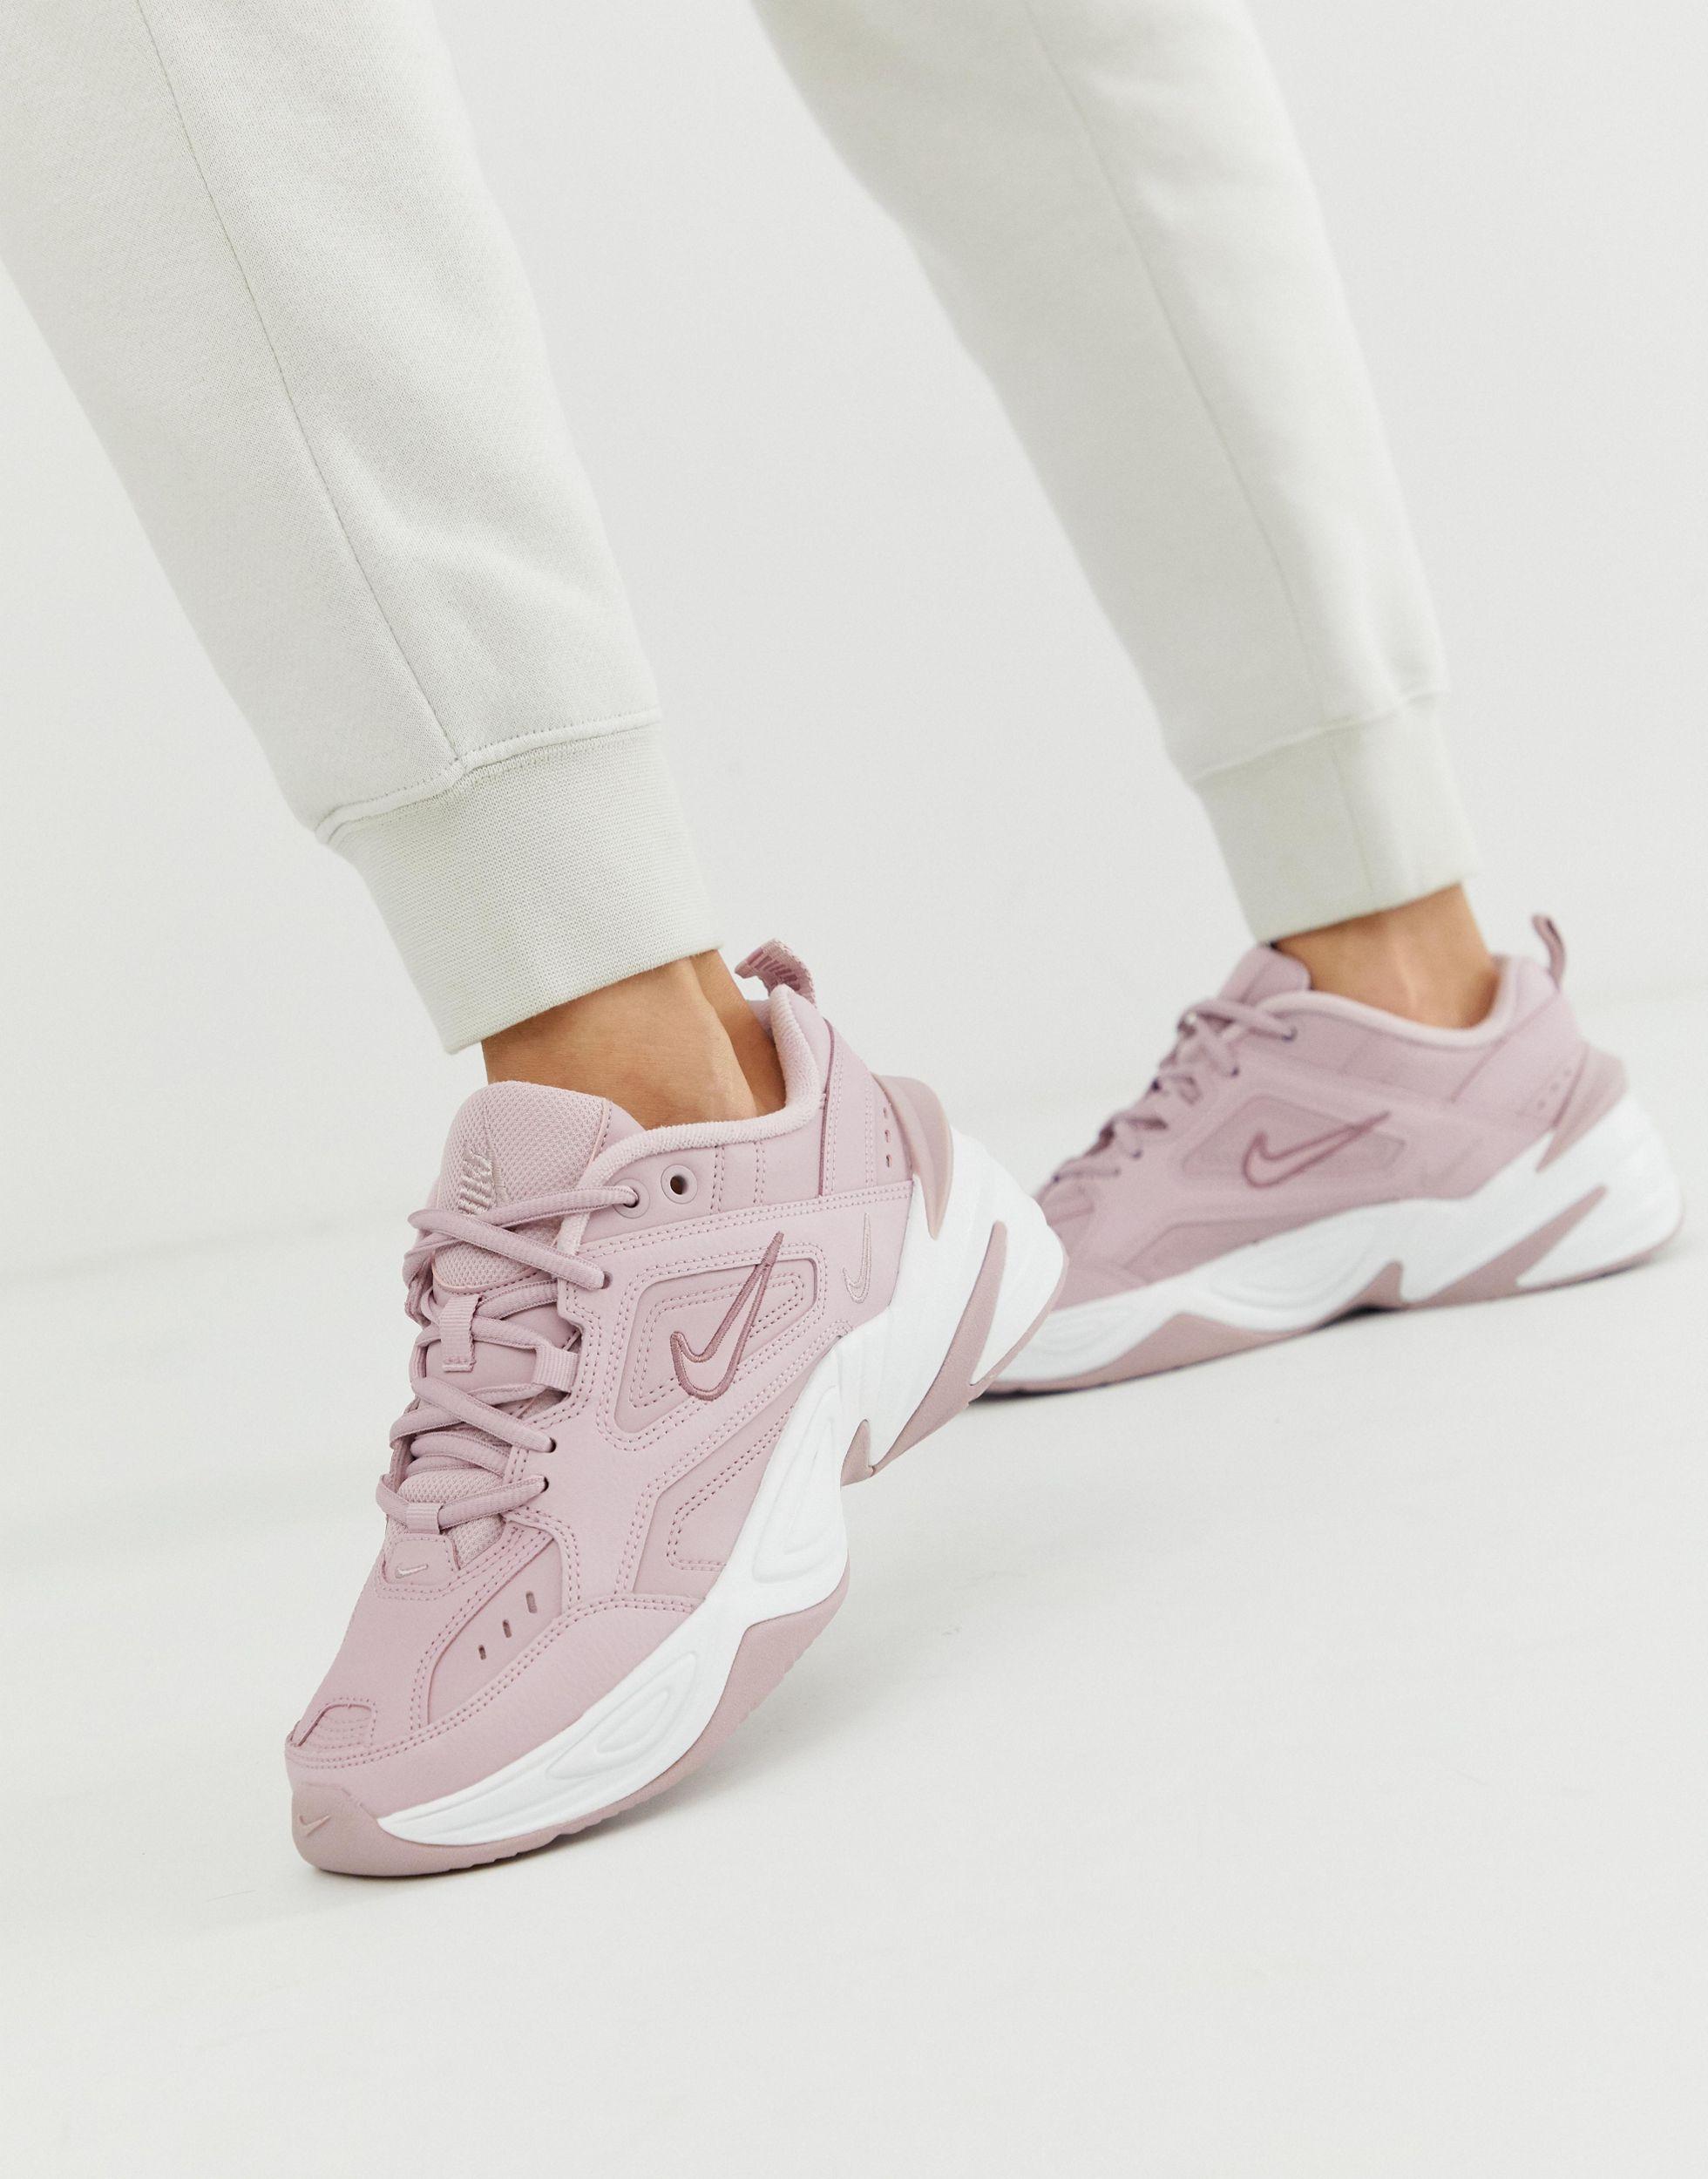 Nike Rubber M2k Tekno Trainers In Pink | Lyst Australia